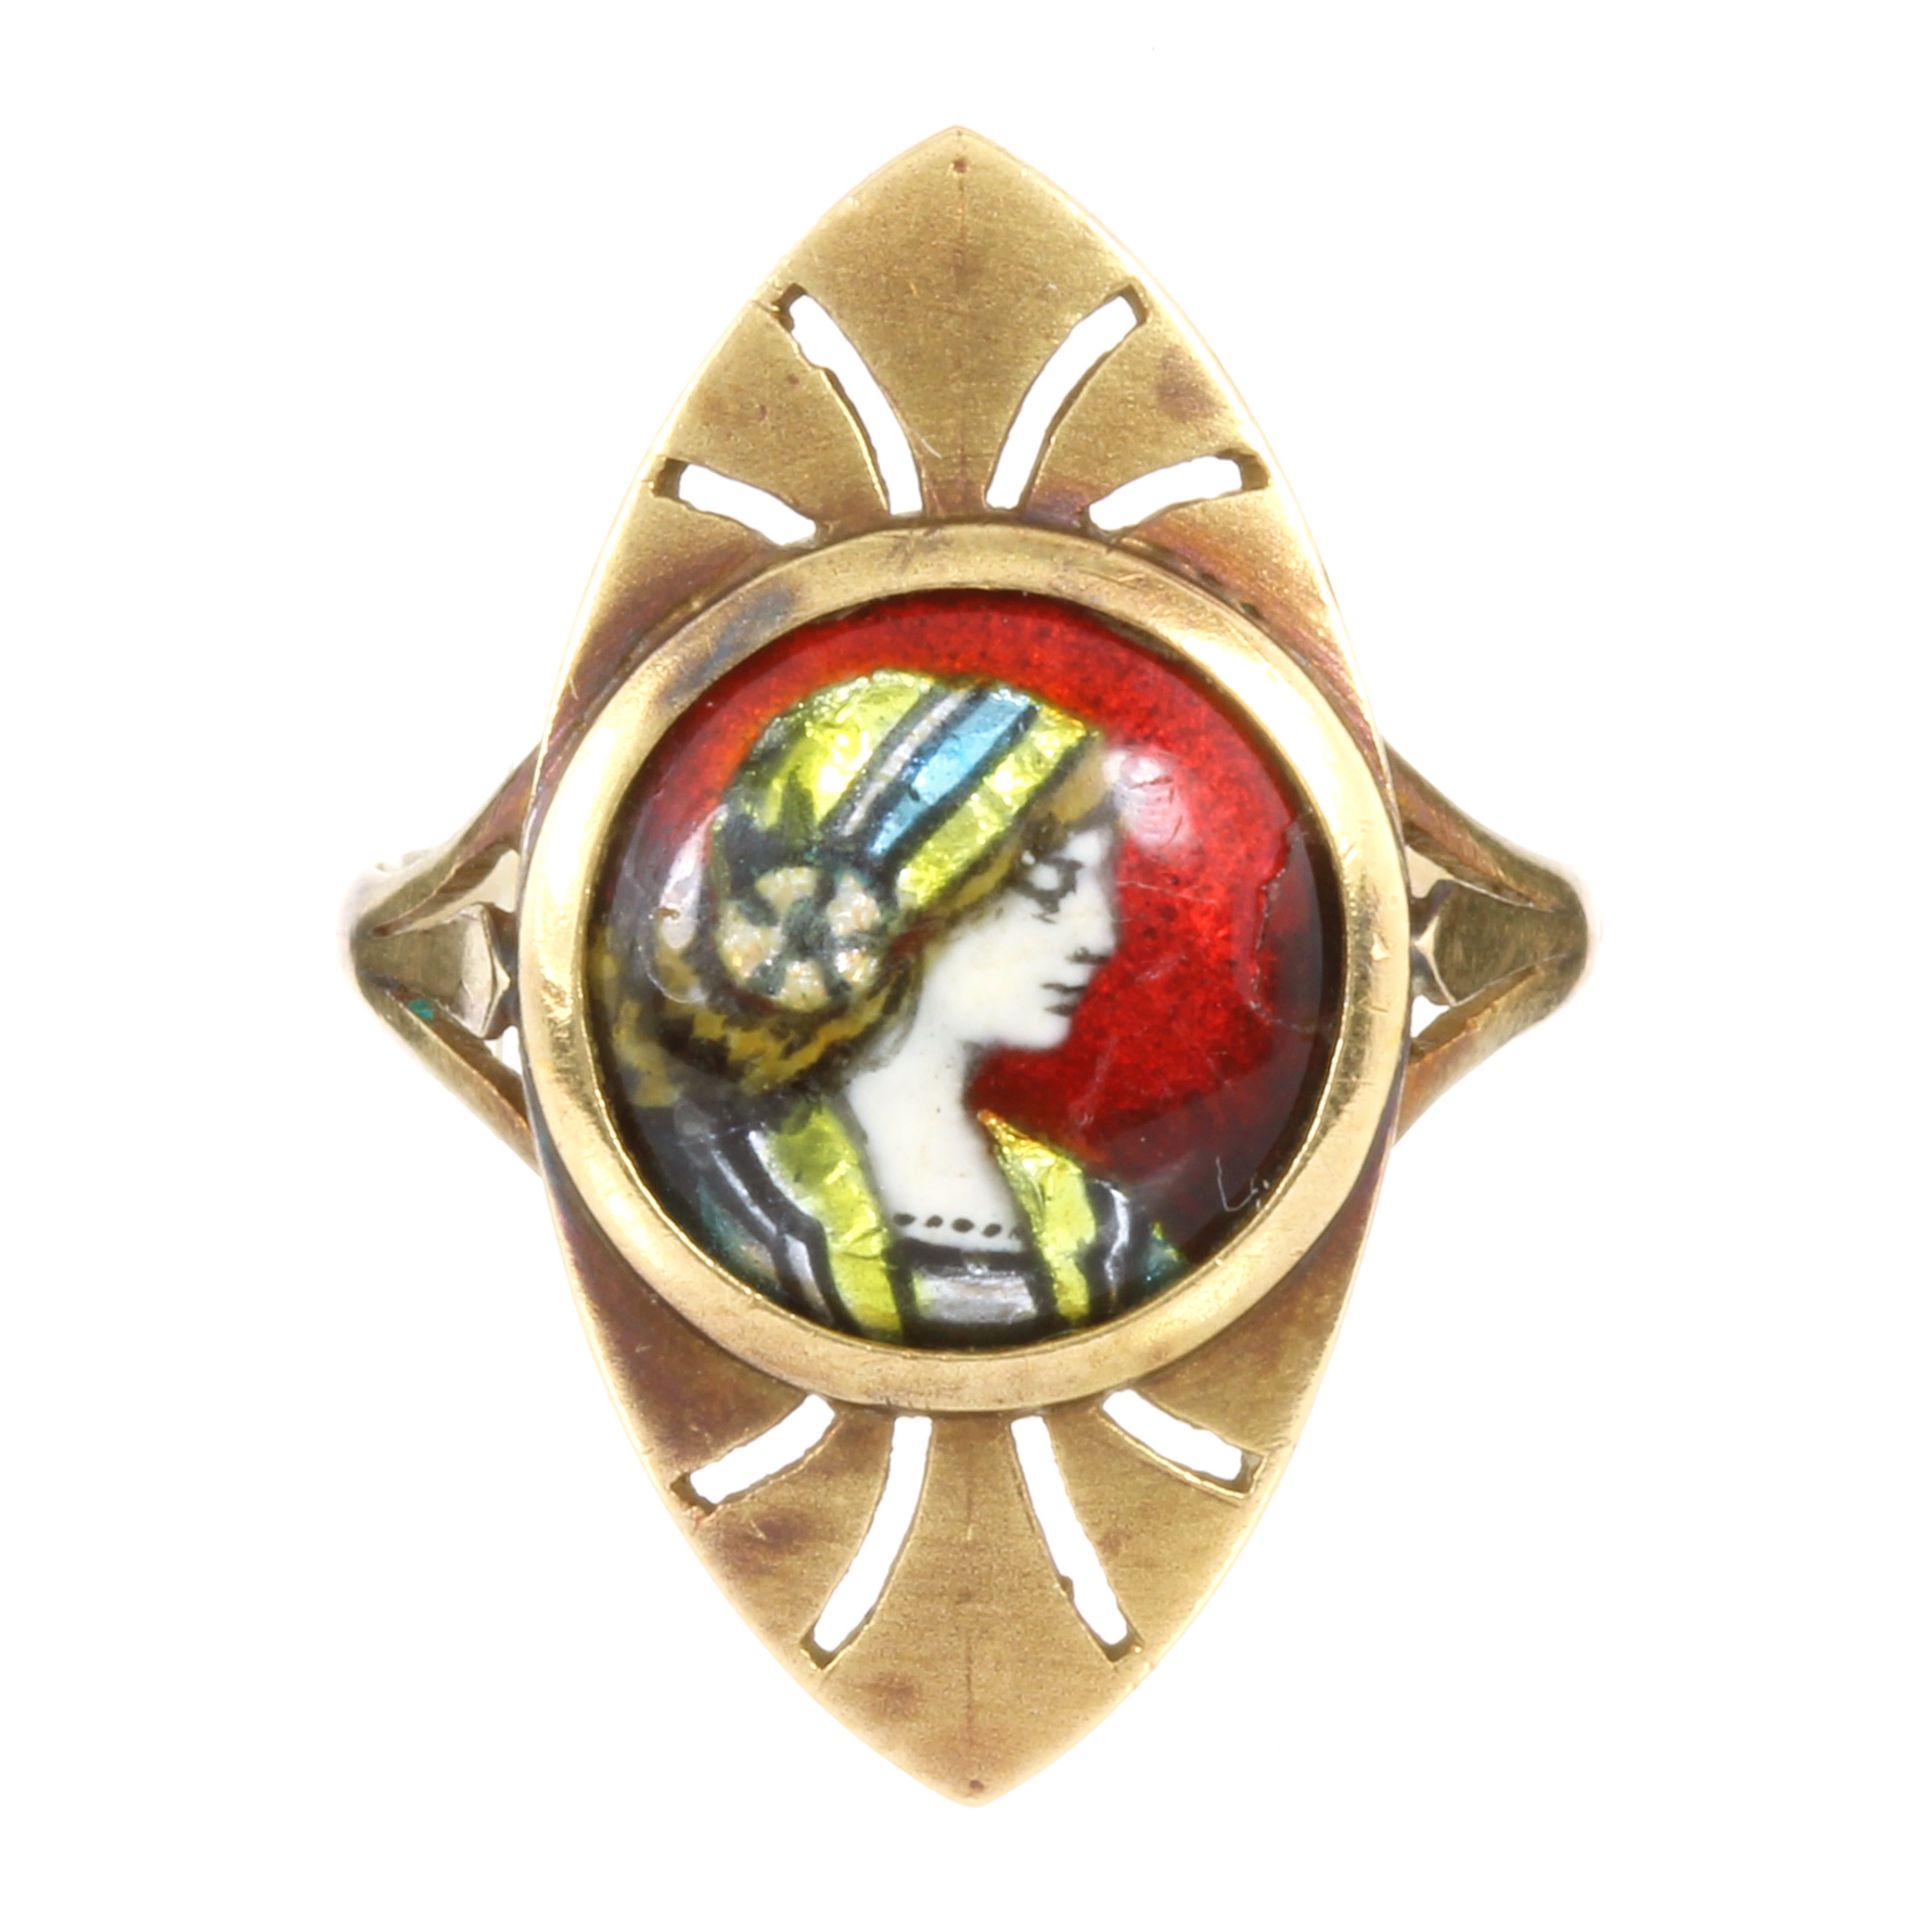 A LIMOGES ENAMEL DRESS RING in 18ct yellow gold set with a central Limoges enamel roundel